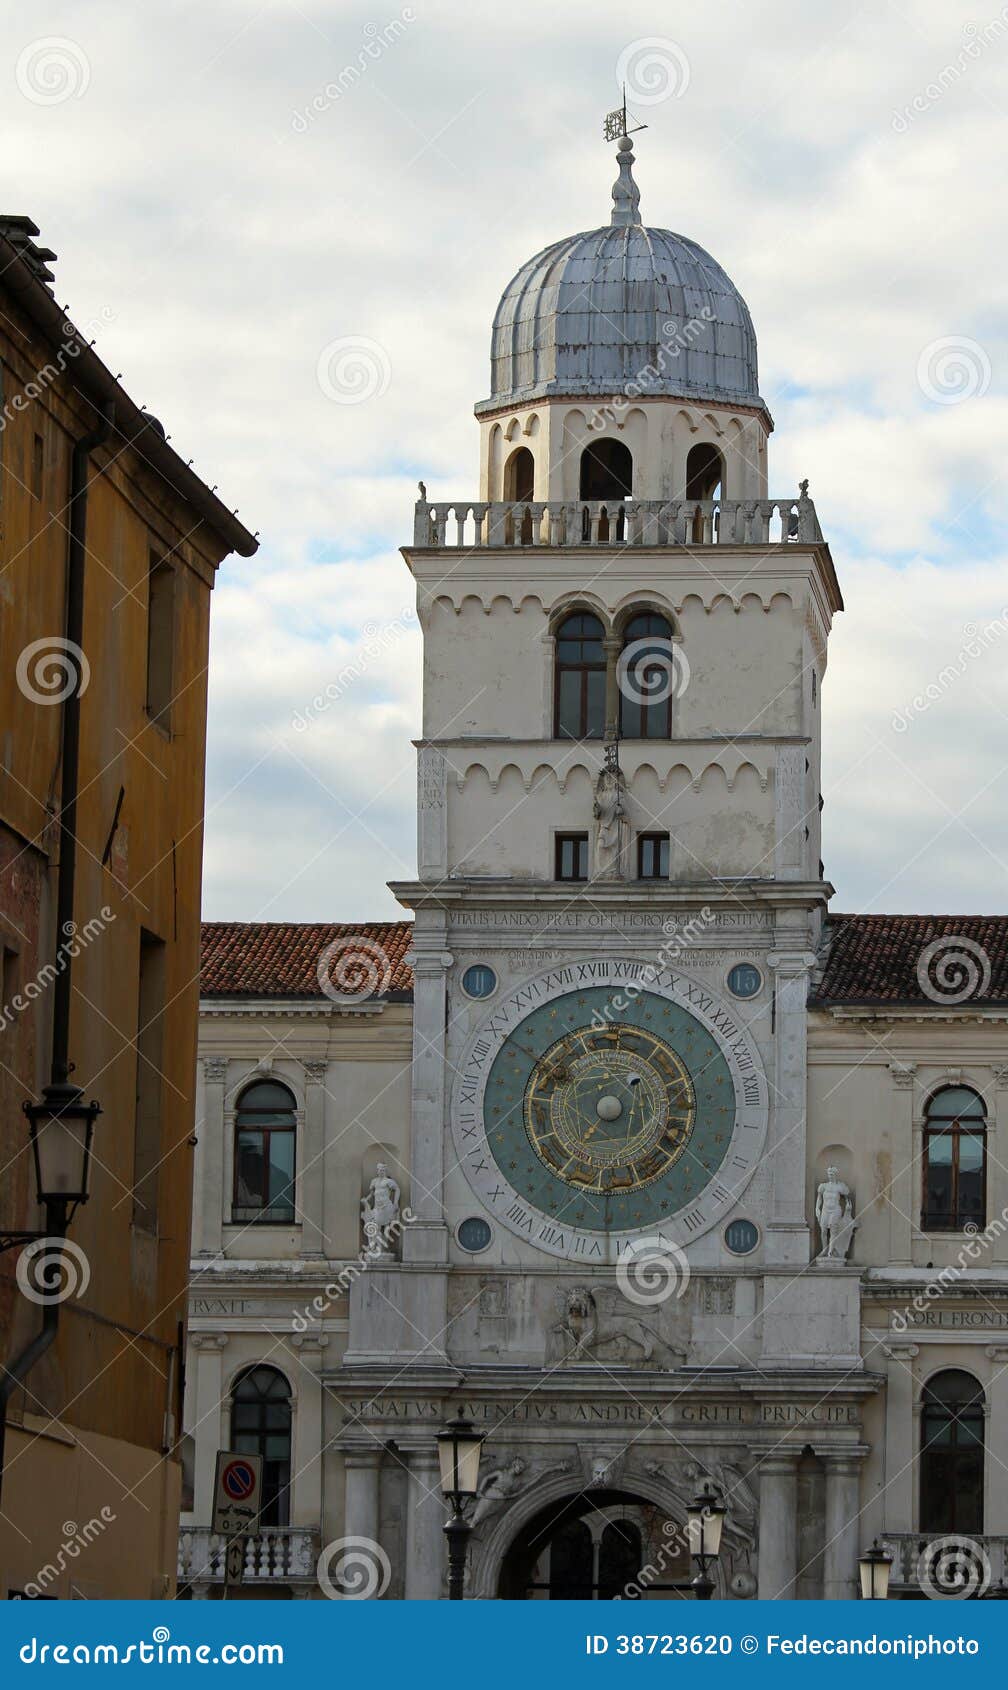 tower and astronomical clock by jacopo dondi